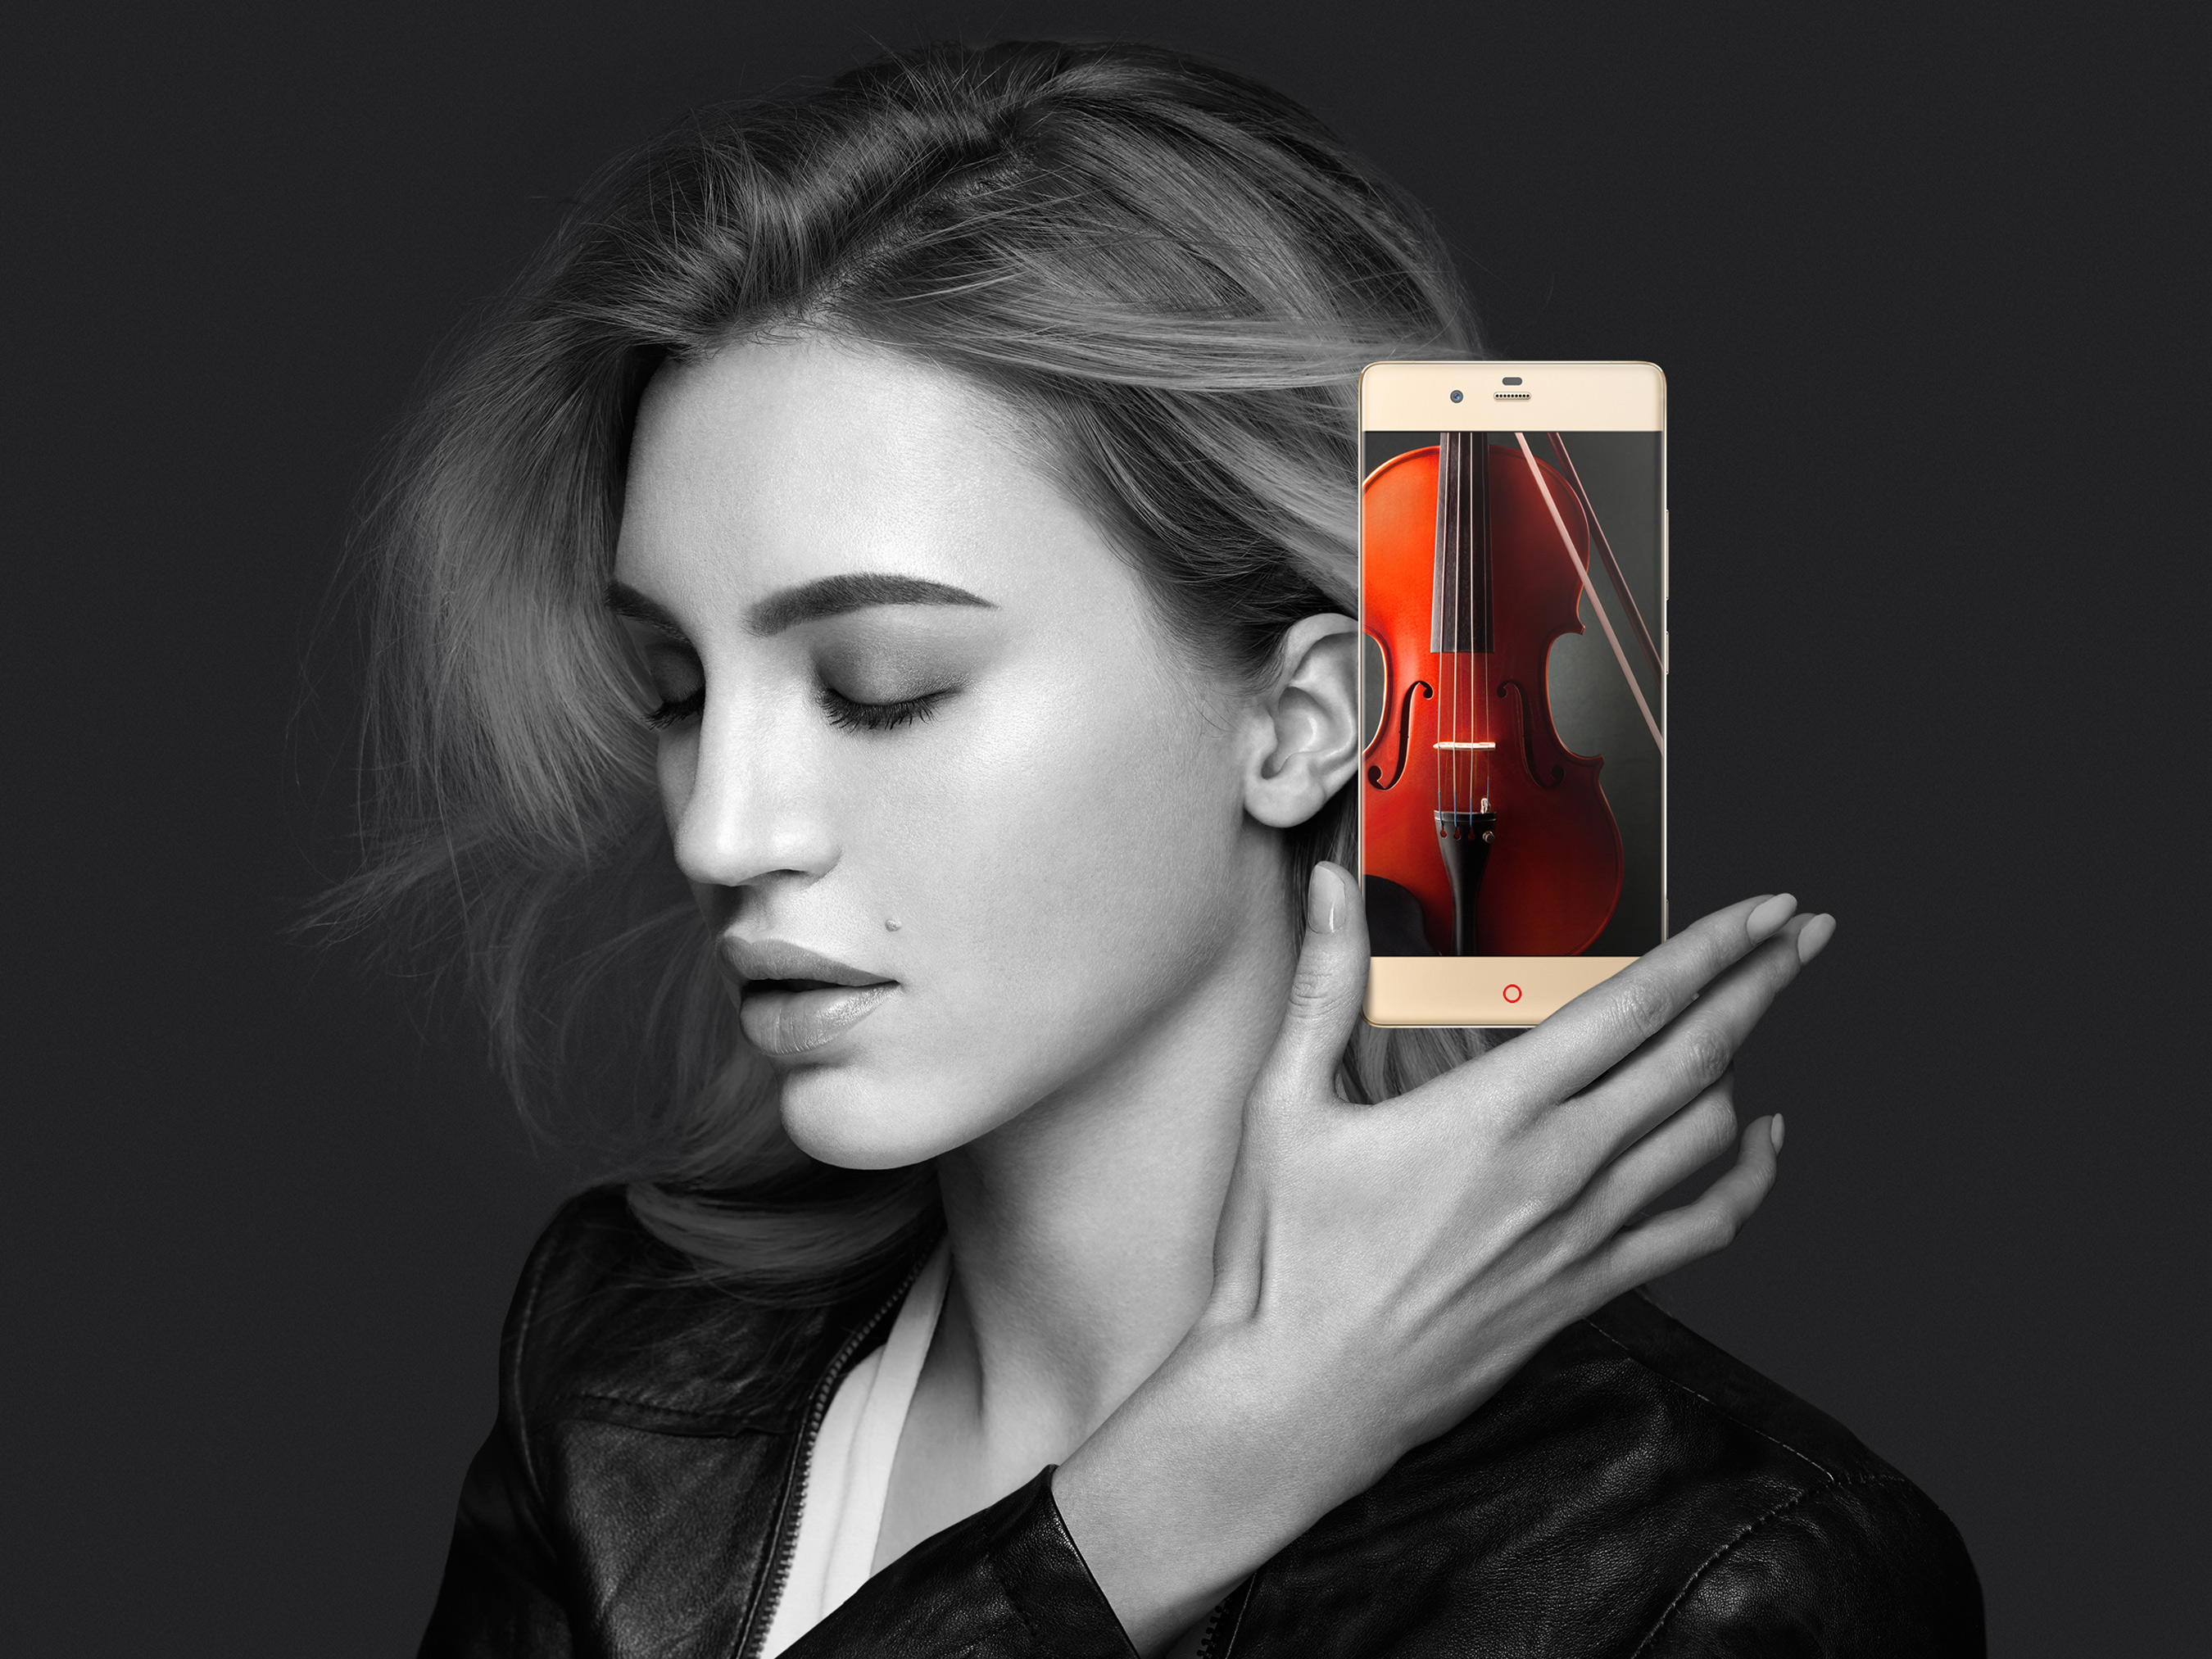 nubia Z9 is a borderless phone with revolutionary Frame interactive Technology(FiT).This innovative technology redefines user interaction and brings endless interactive freedom.